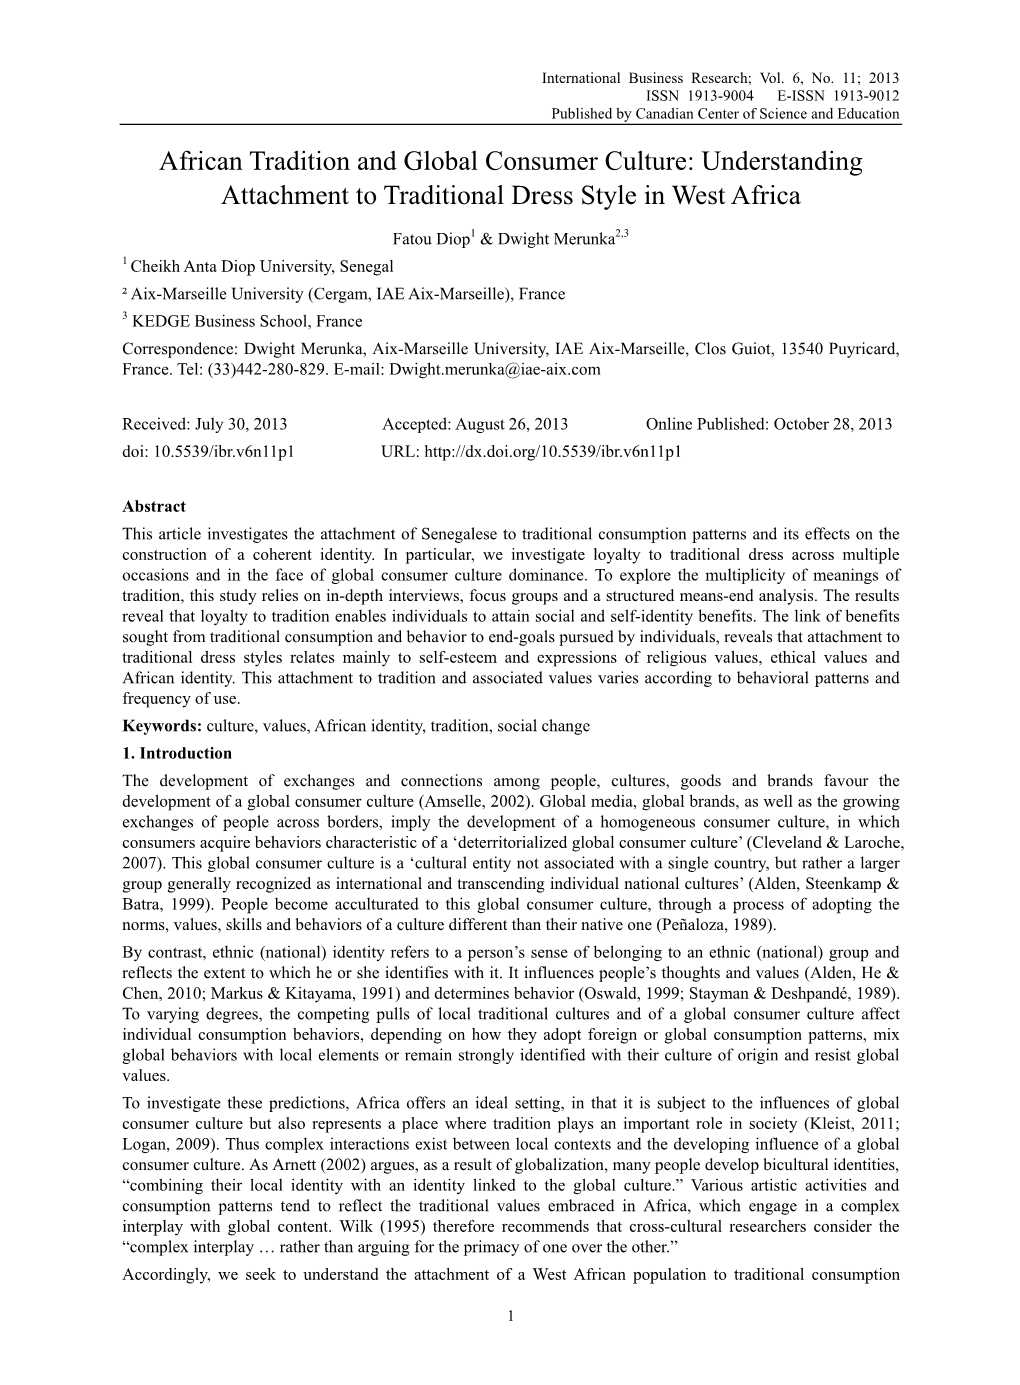 African Tradition and Global Consumer Culture: Understanding Attachment to Traditional Dress Style in West Africa